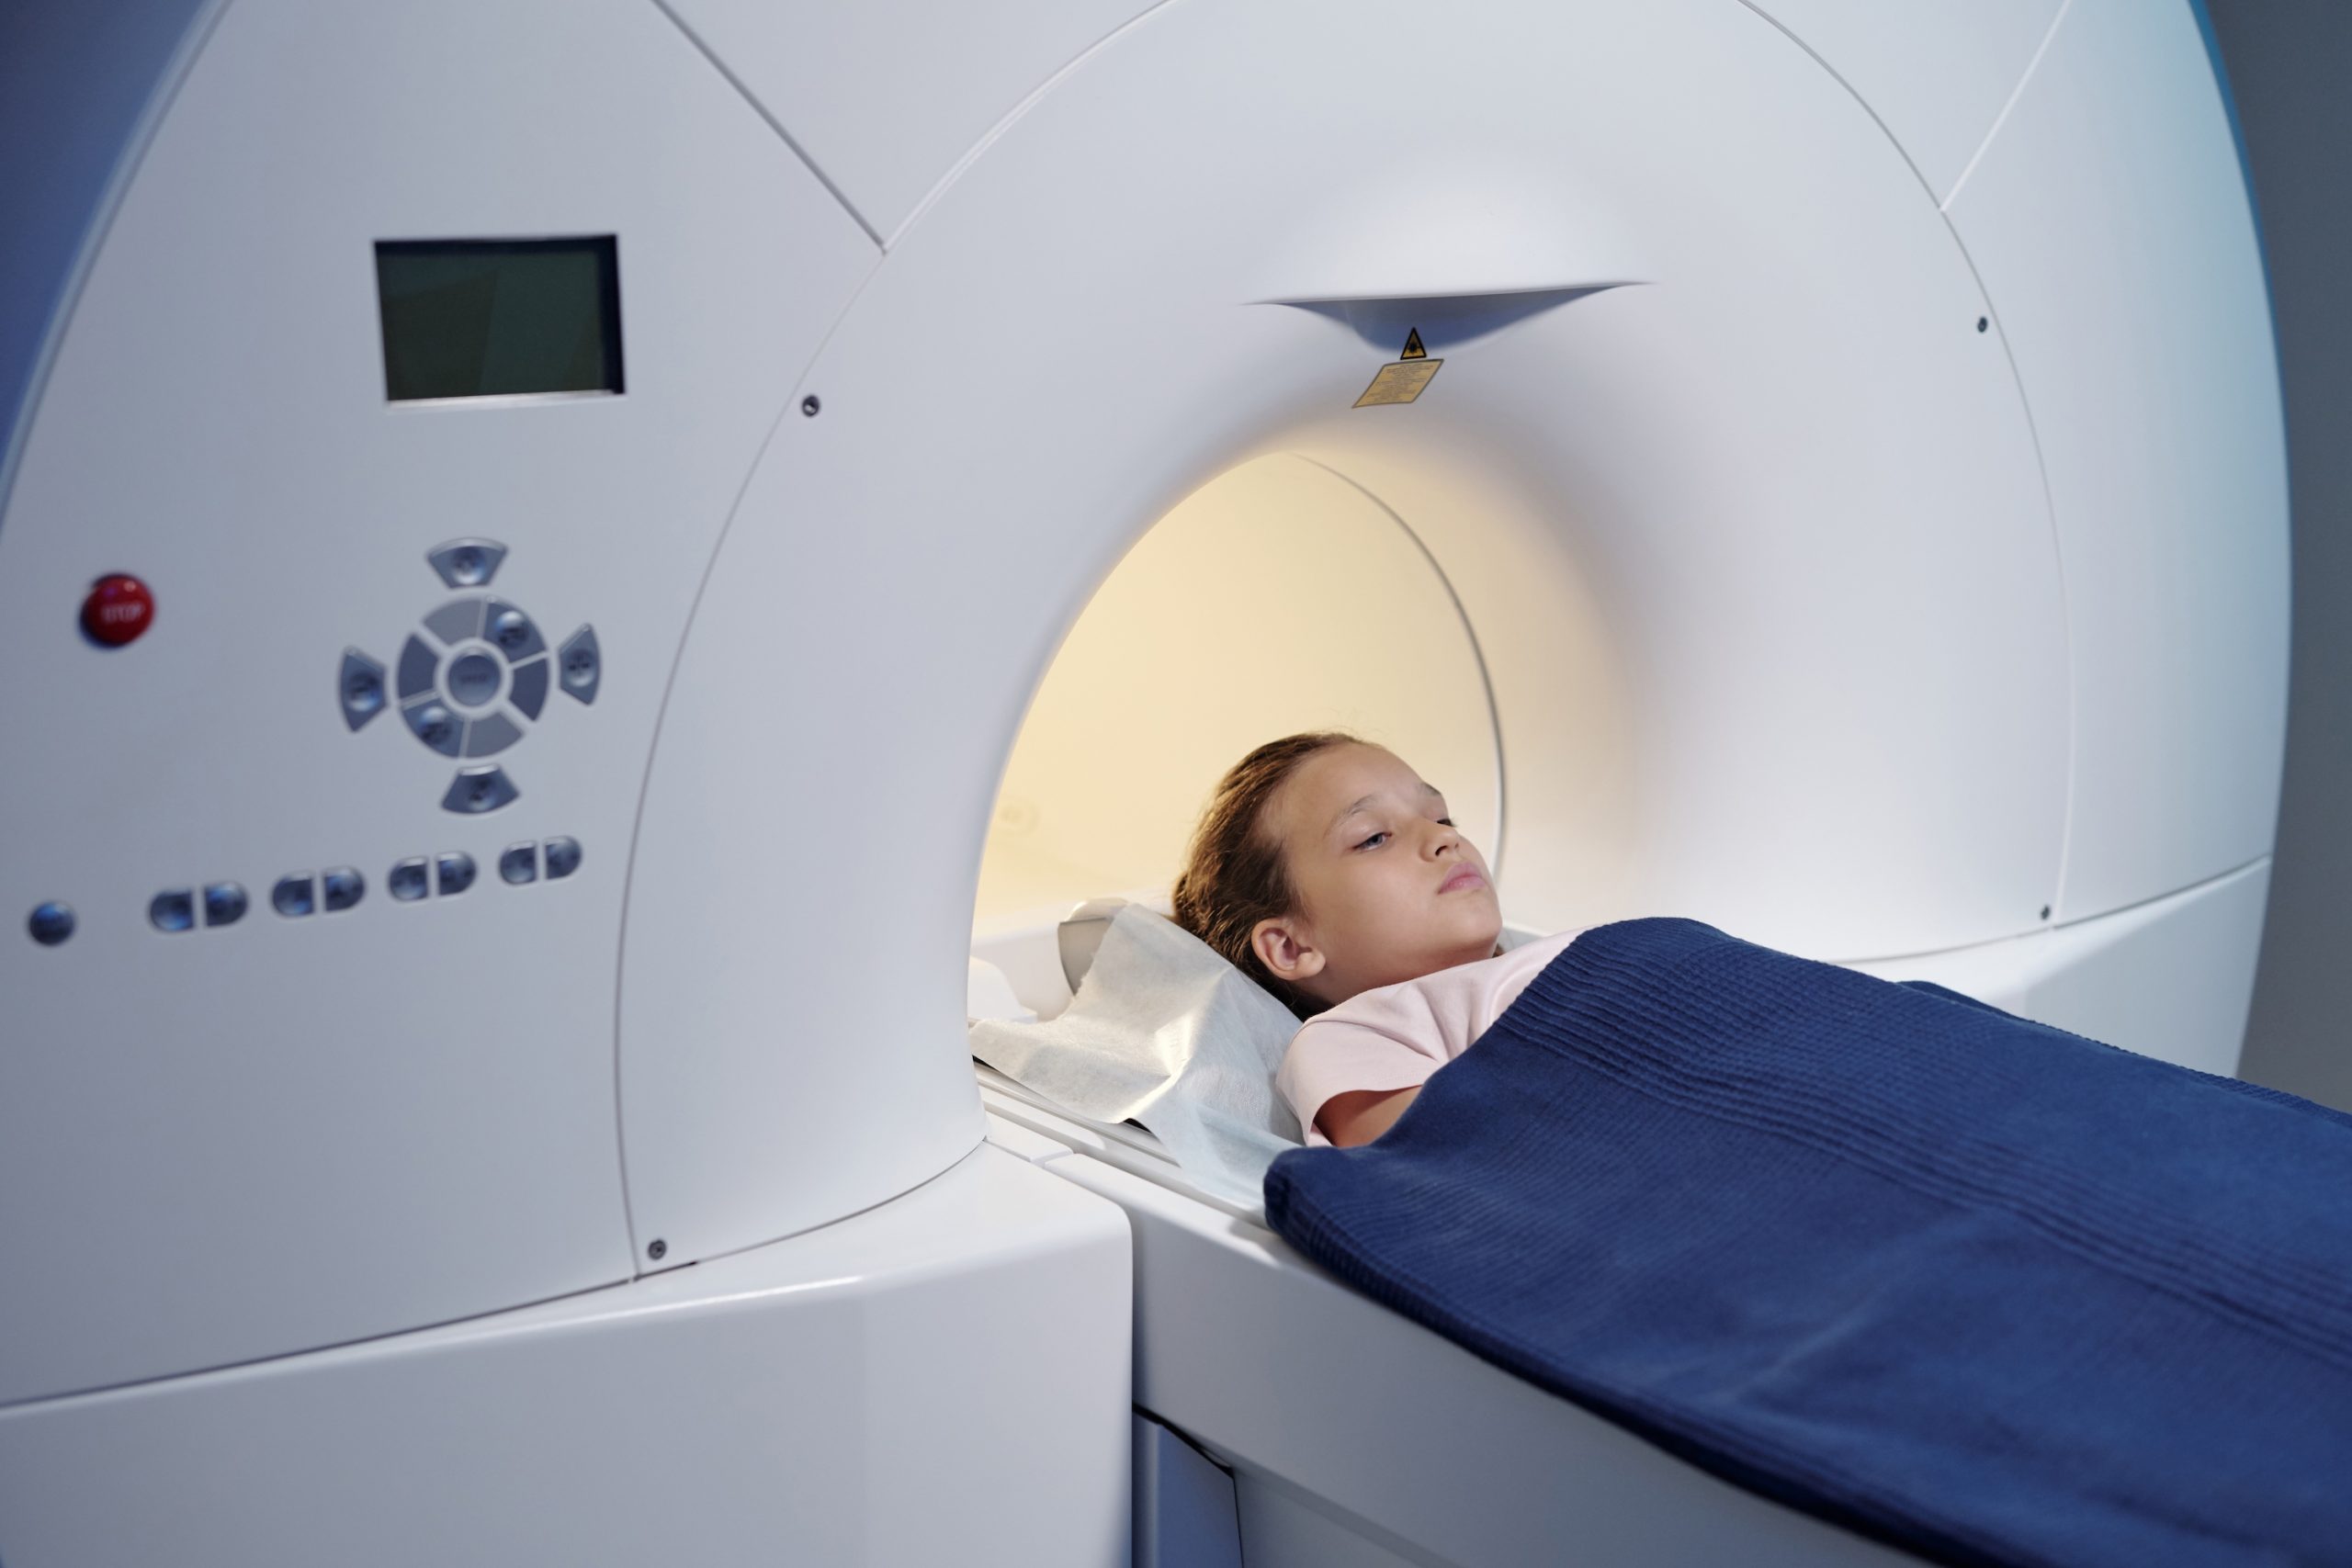 Press Release: Study Finds Neck Injury Prediction Rule Could Decrease Imaging Exposure in Children